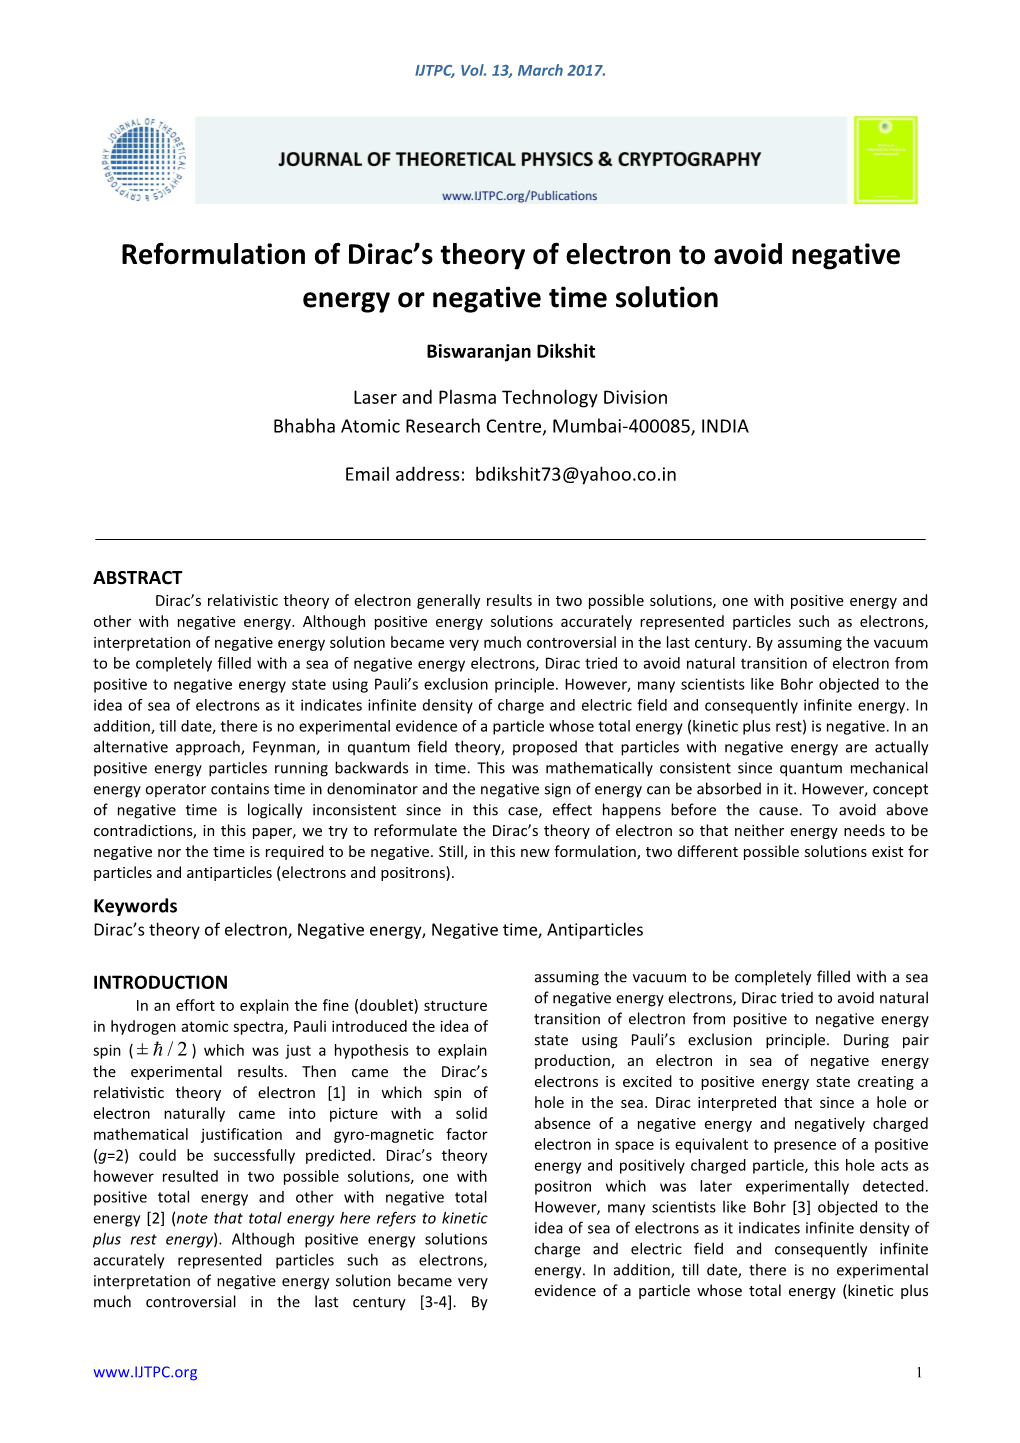 Reformulation of Dirac's Theory of Electron to Avoid Negative Energy Or